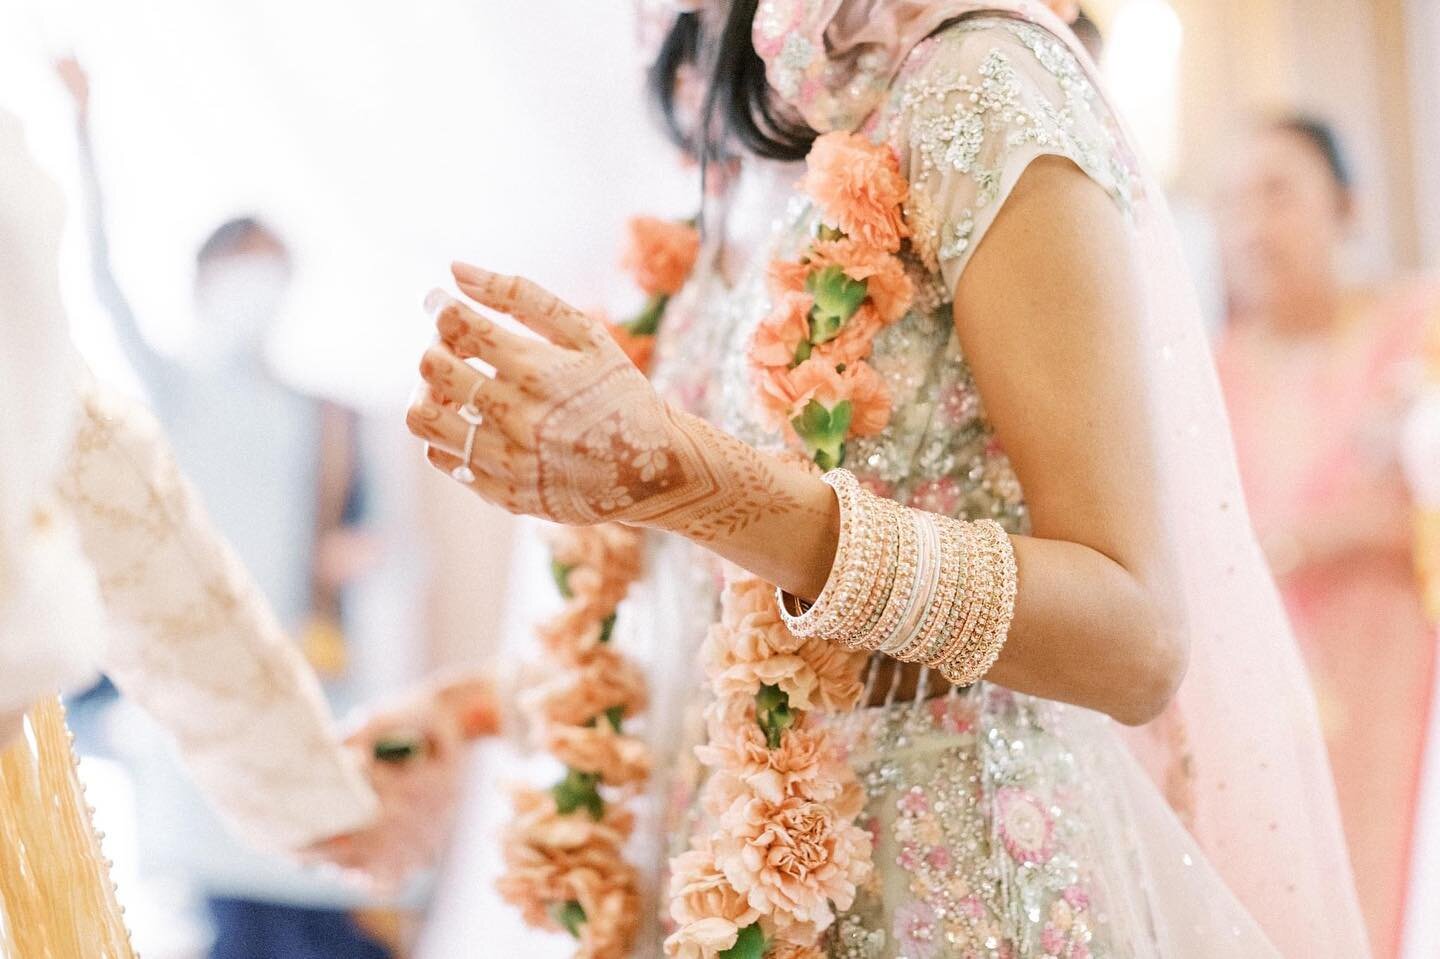 &ldquo;Cute accessories always help bring out an outfit and pull it all together&rdquo; - Coco Chanel 
.
Photo @autumnsilvaphotography 
Florals @1209creative 
Henna @hennazart 
Venue @interconchicago 
Makeup @diemangiebeautyteam